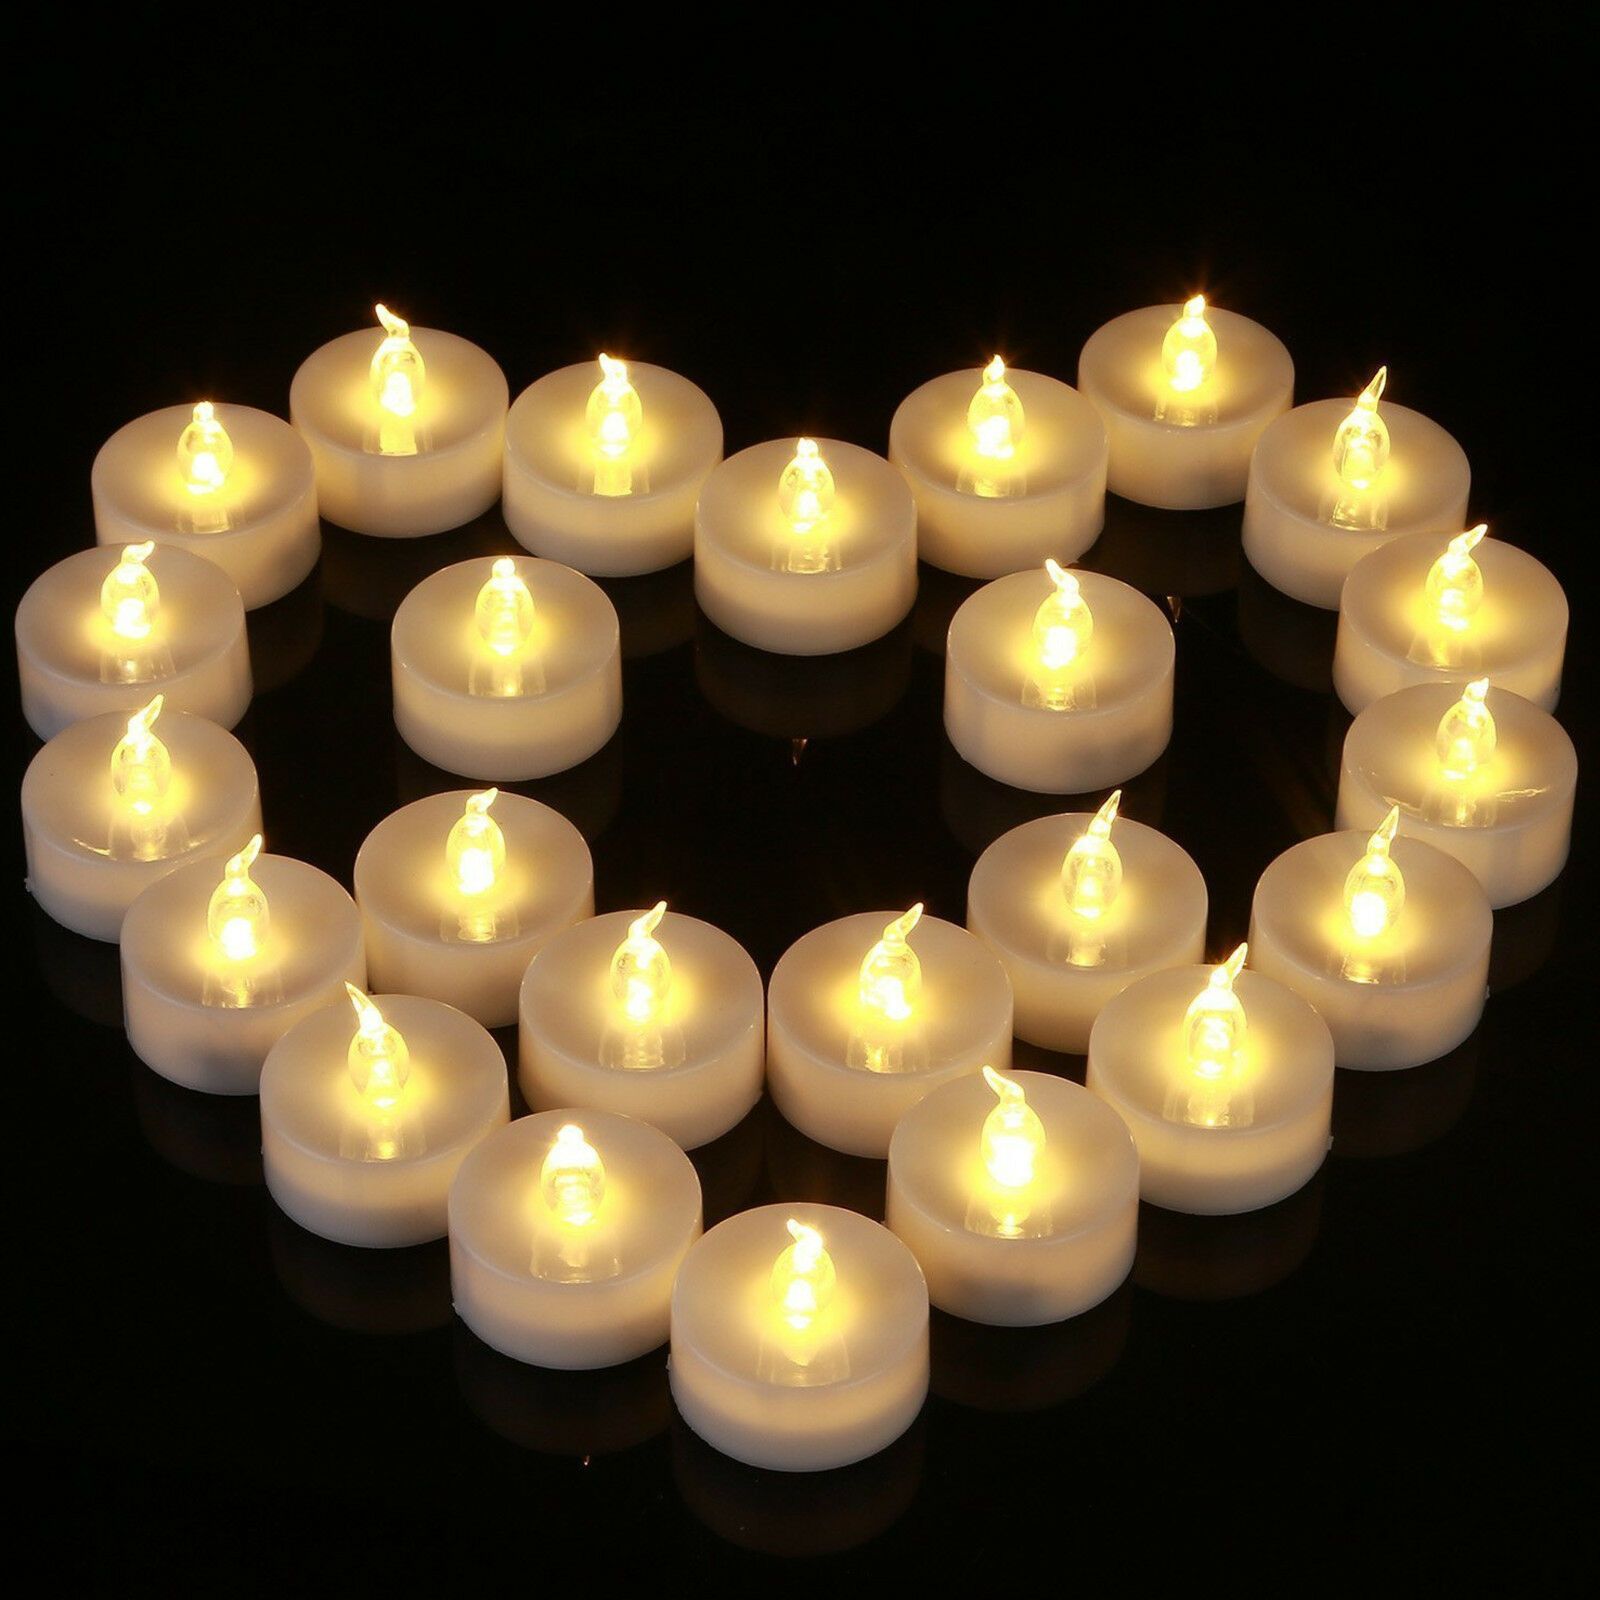 USA Wave Flickering Flameless LED Tealight Votive Candle Party Birthday Lights 